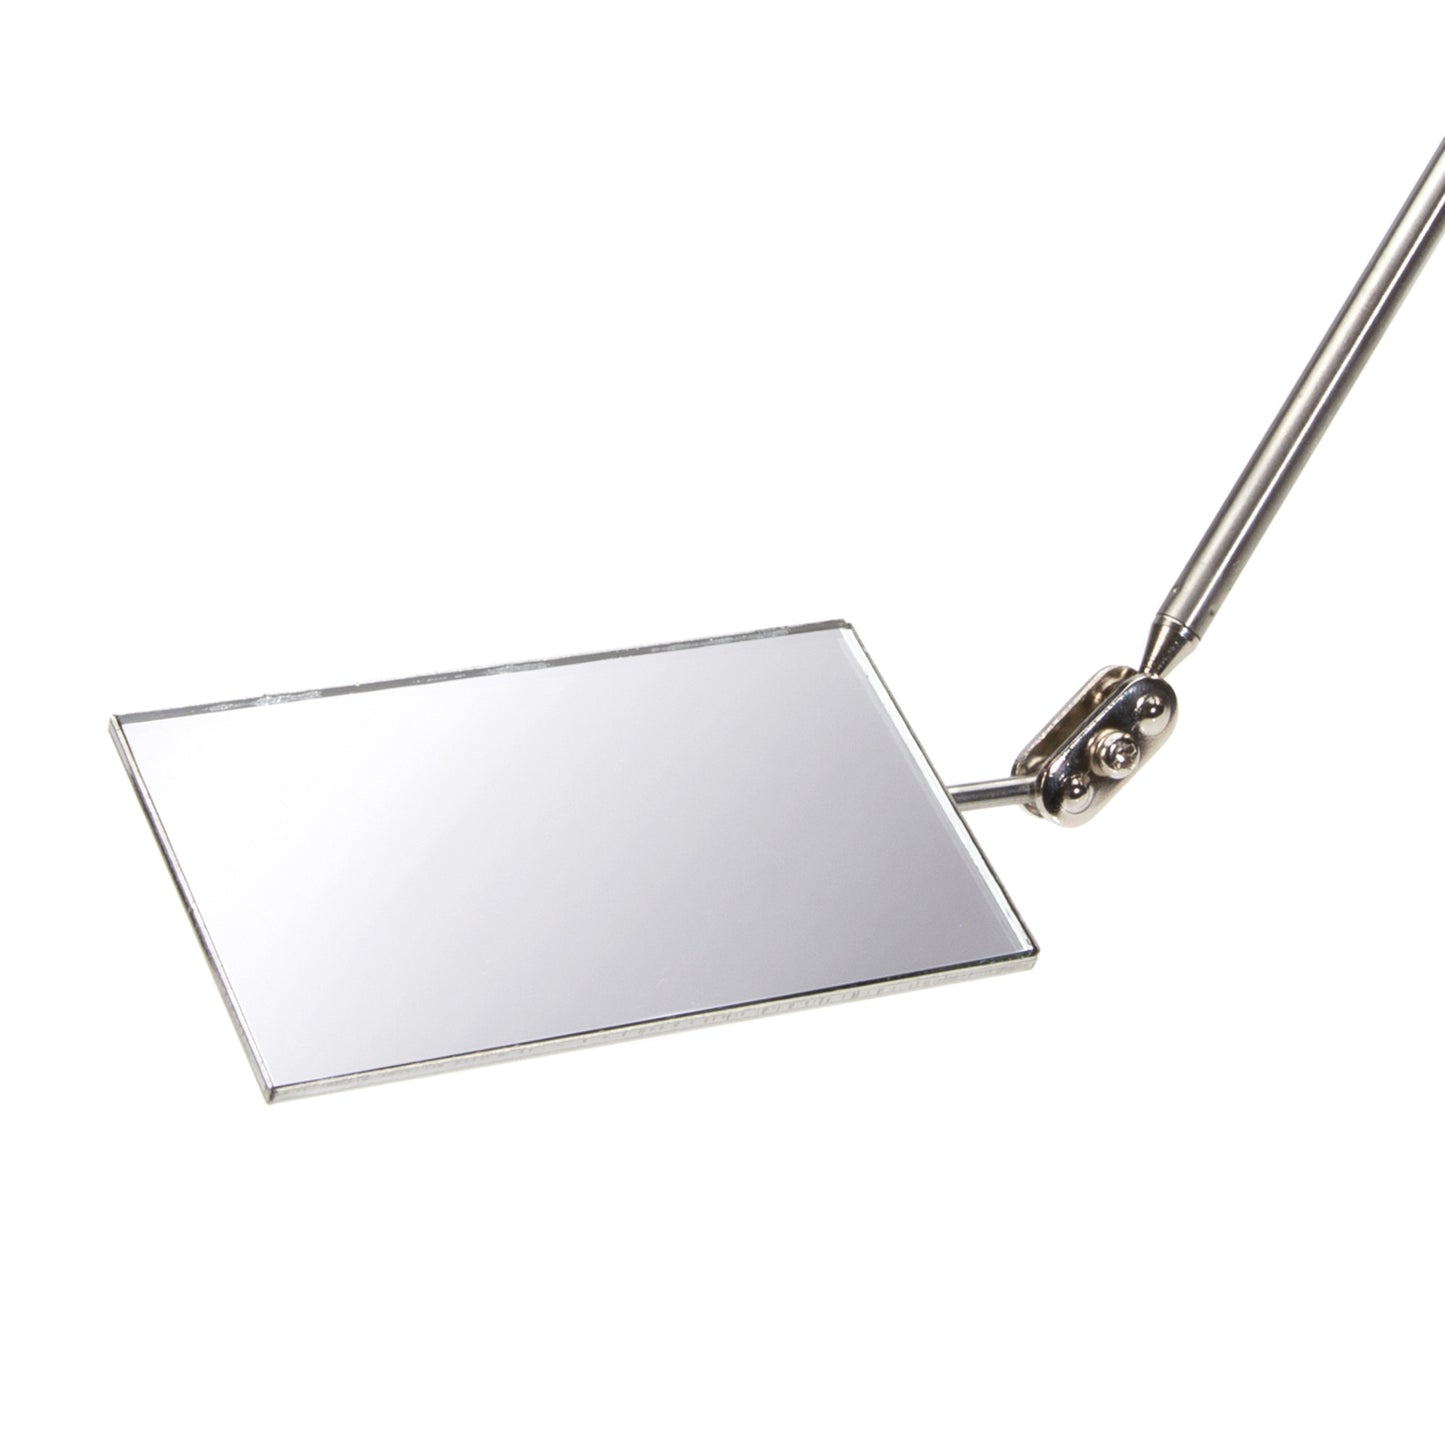 30-inch Telescoping 2-Inch x 3.5-Inch Articulating Inspection Mirror